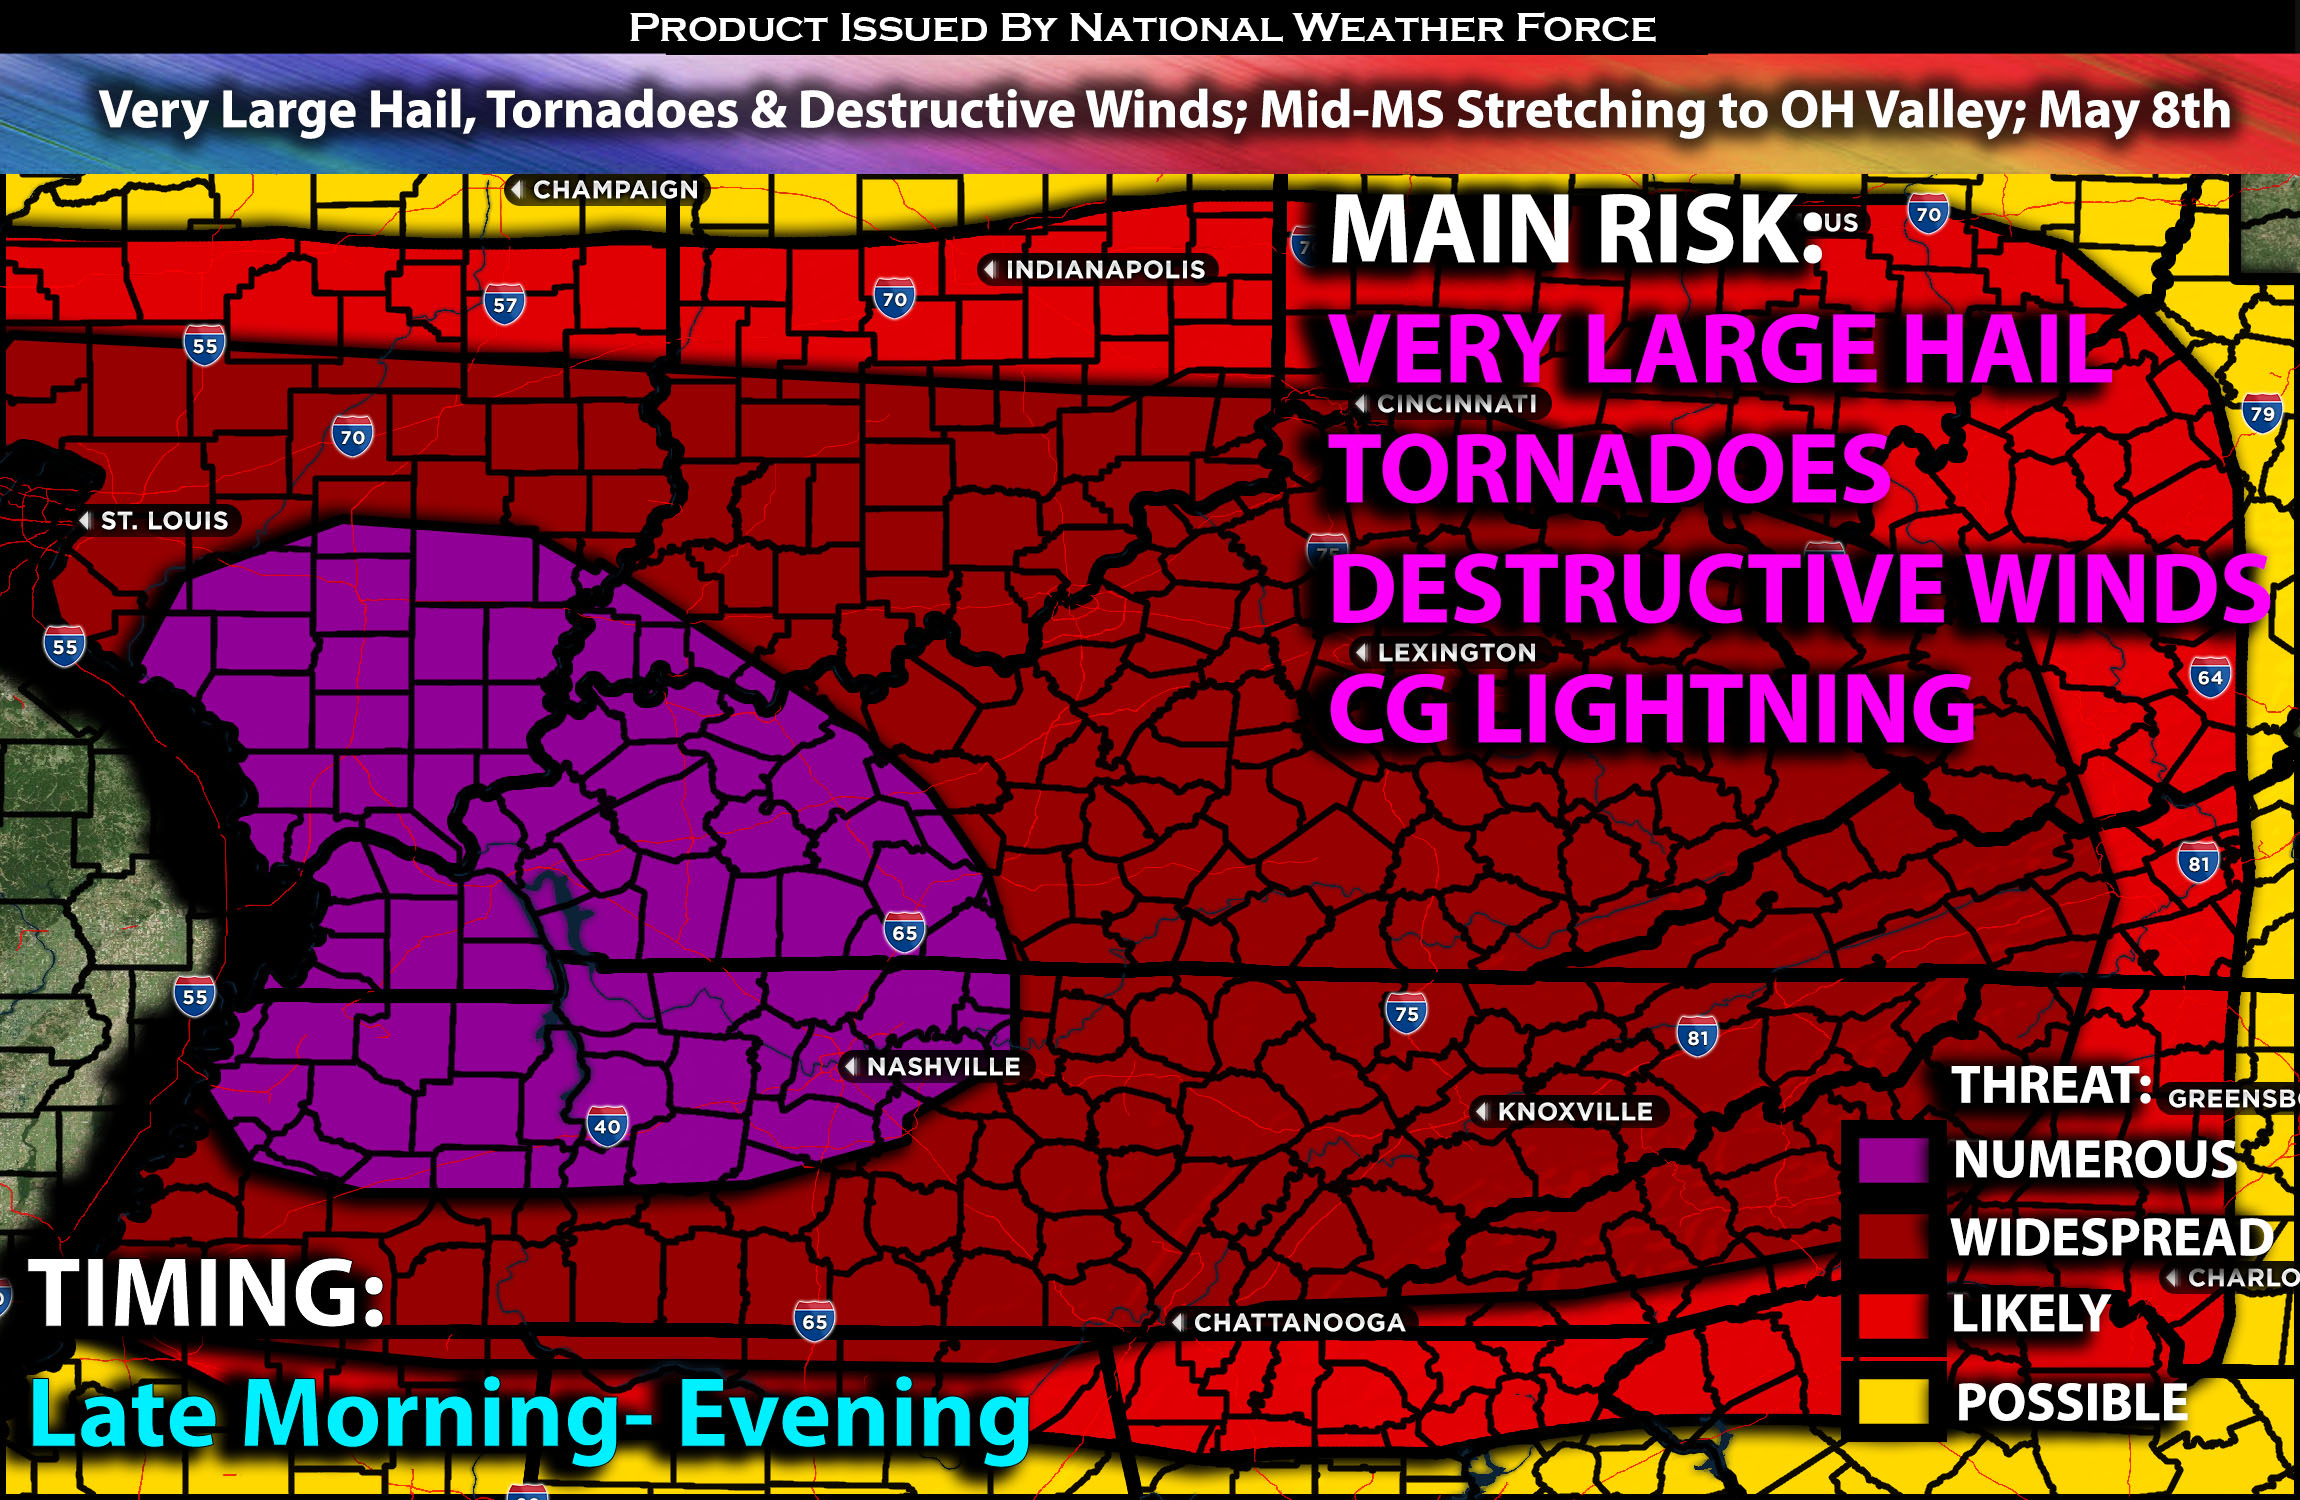 Very Large Hail, Tornadoes & Destructive Winds; Mid-MS Stretching to OH Valley; May 8th